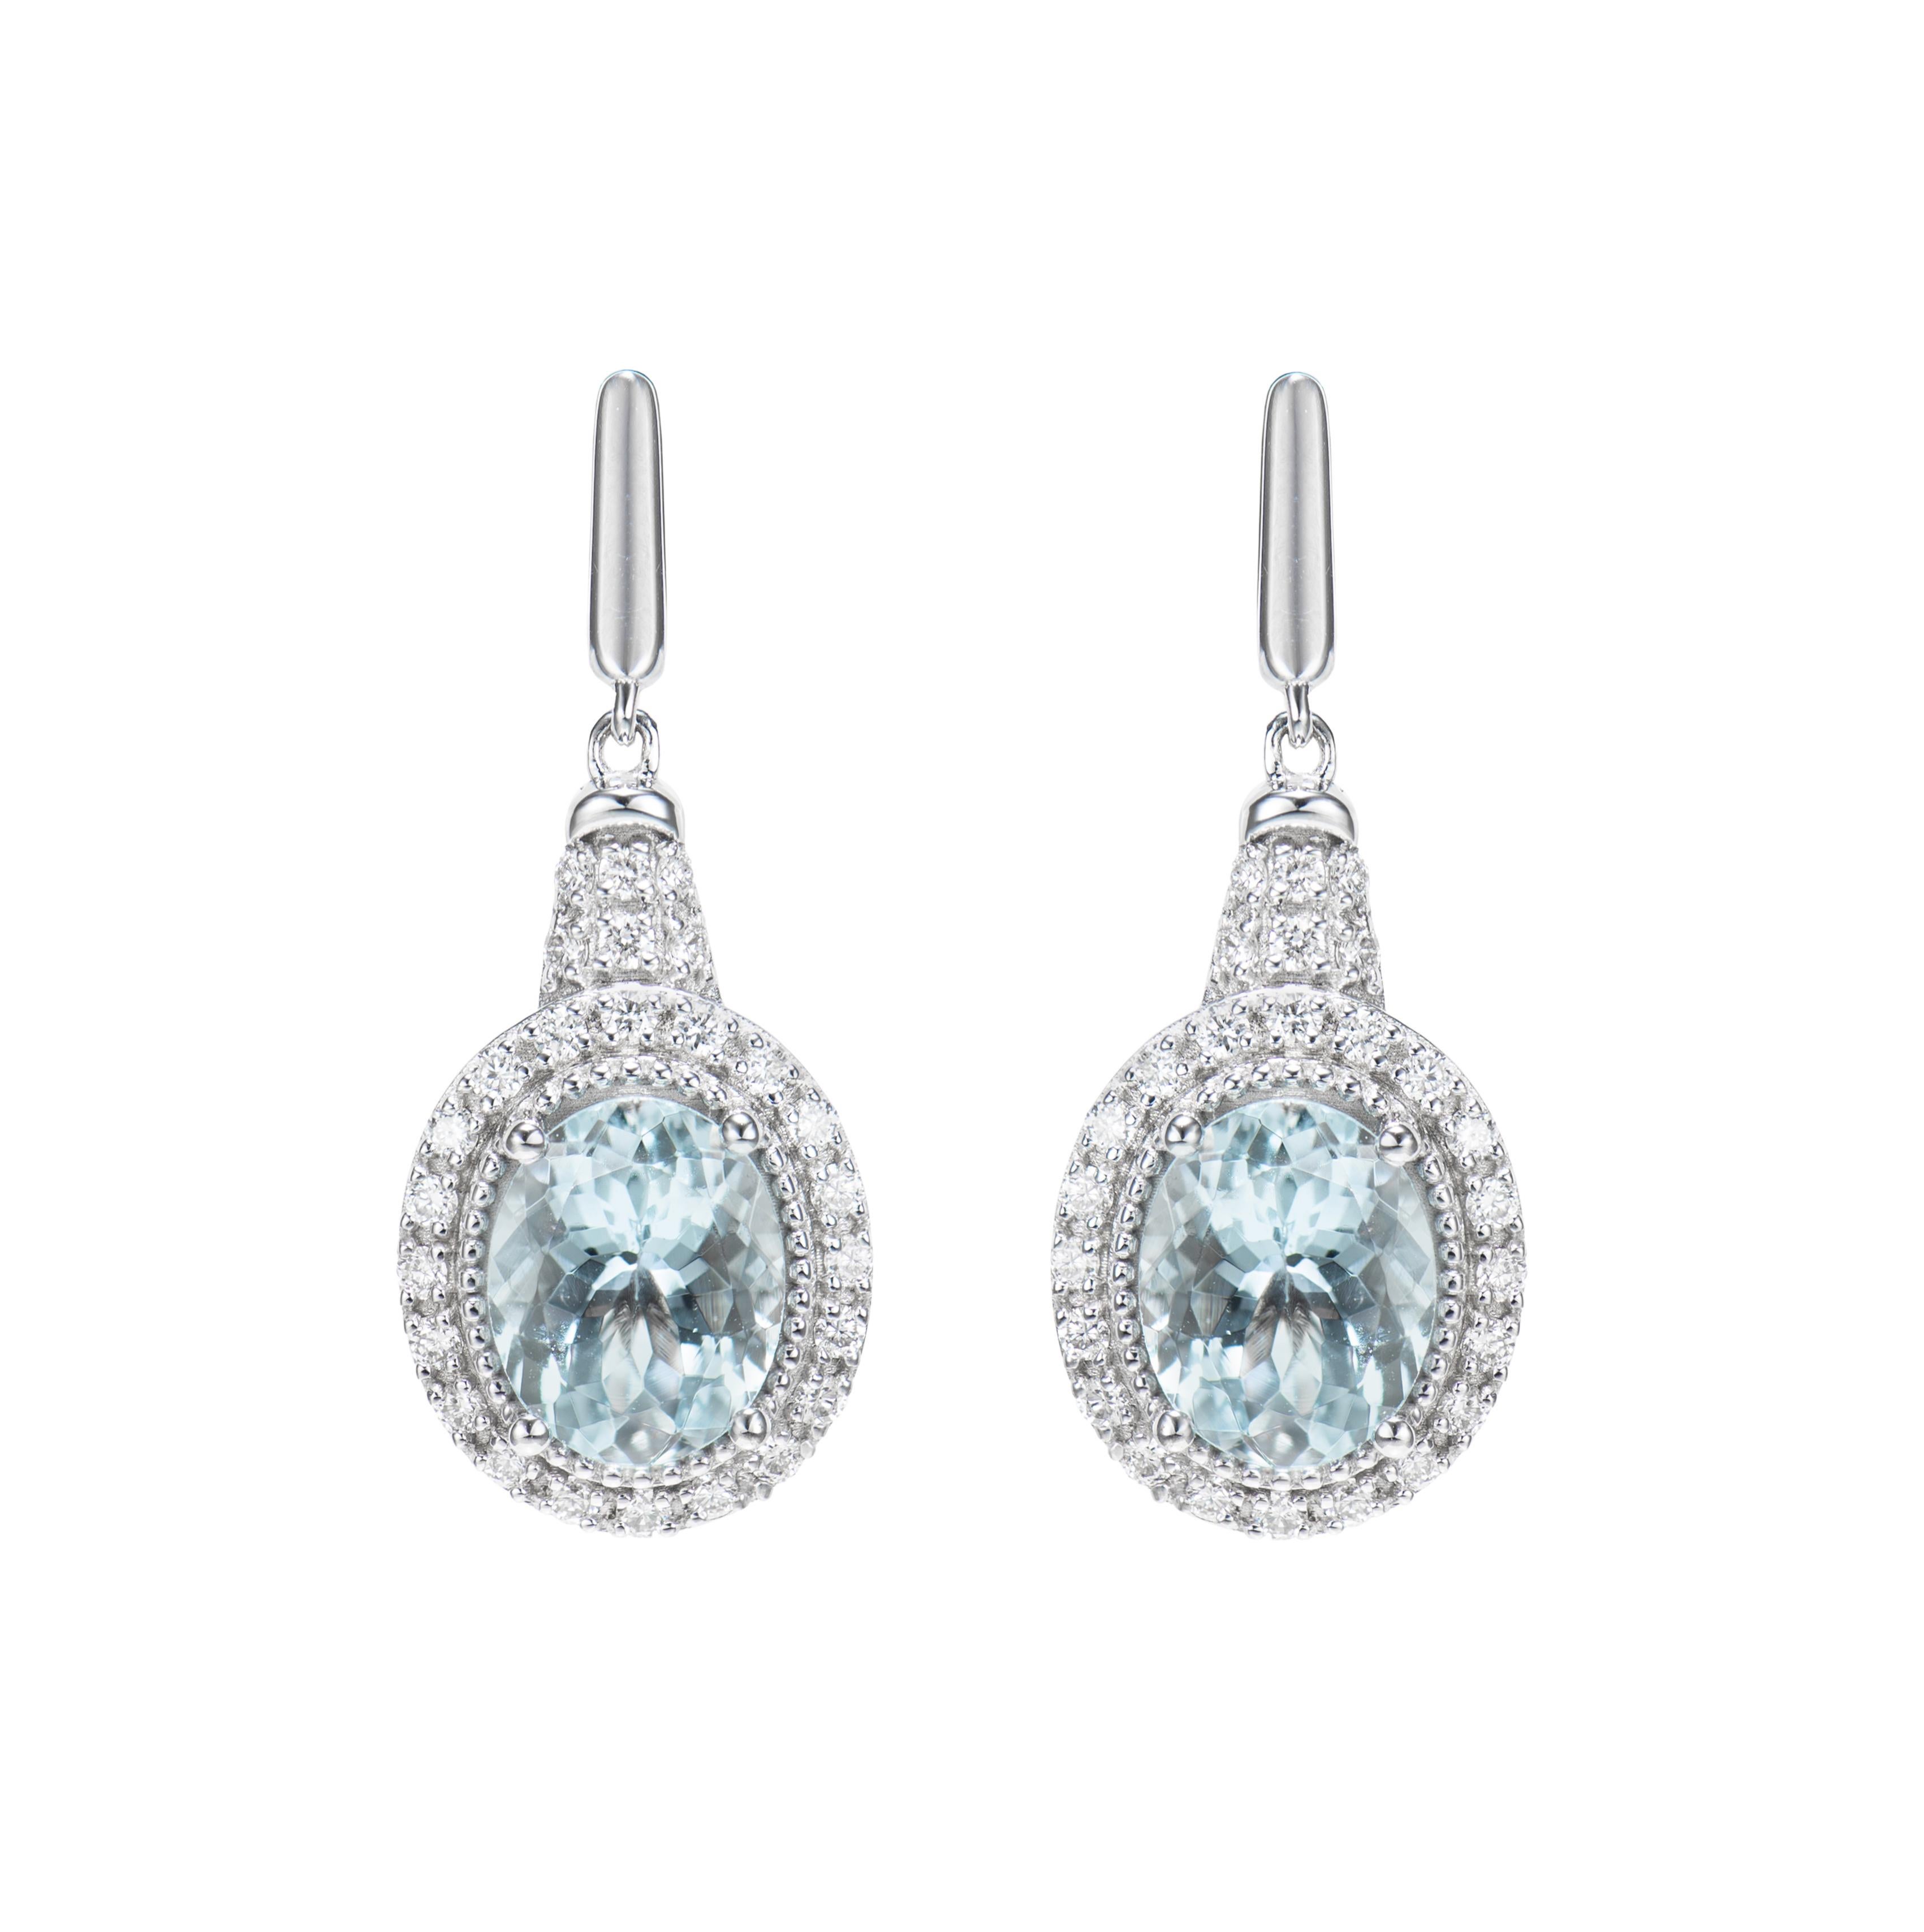 Contemporary Aquamarine and White Diamond Drops Earring in 18 Karat White Gold. For Sale